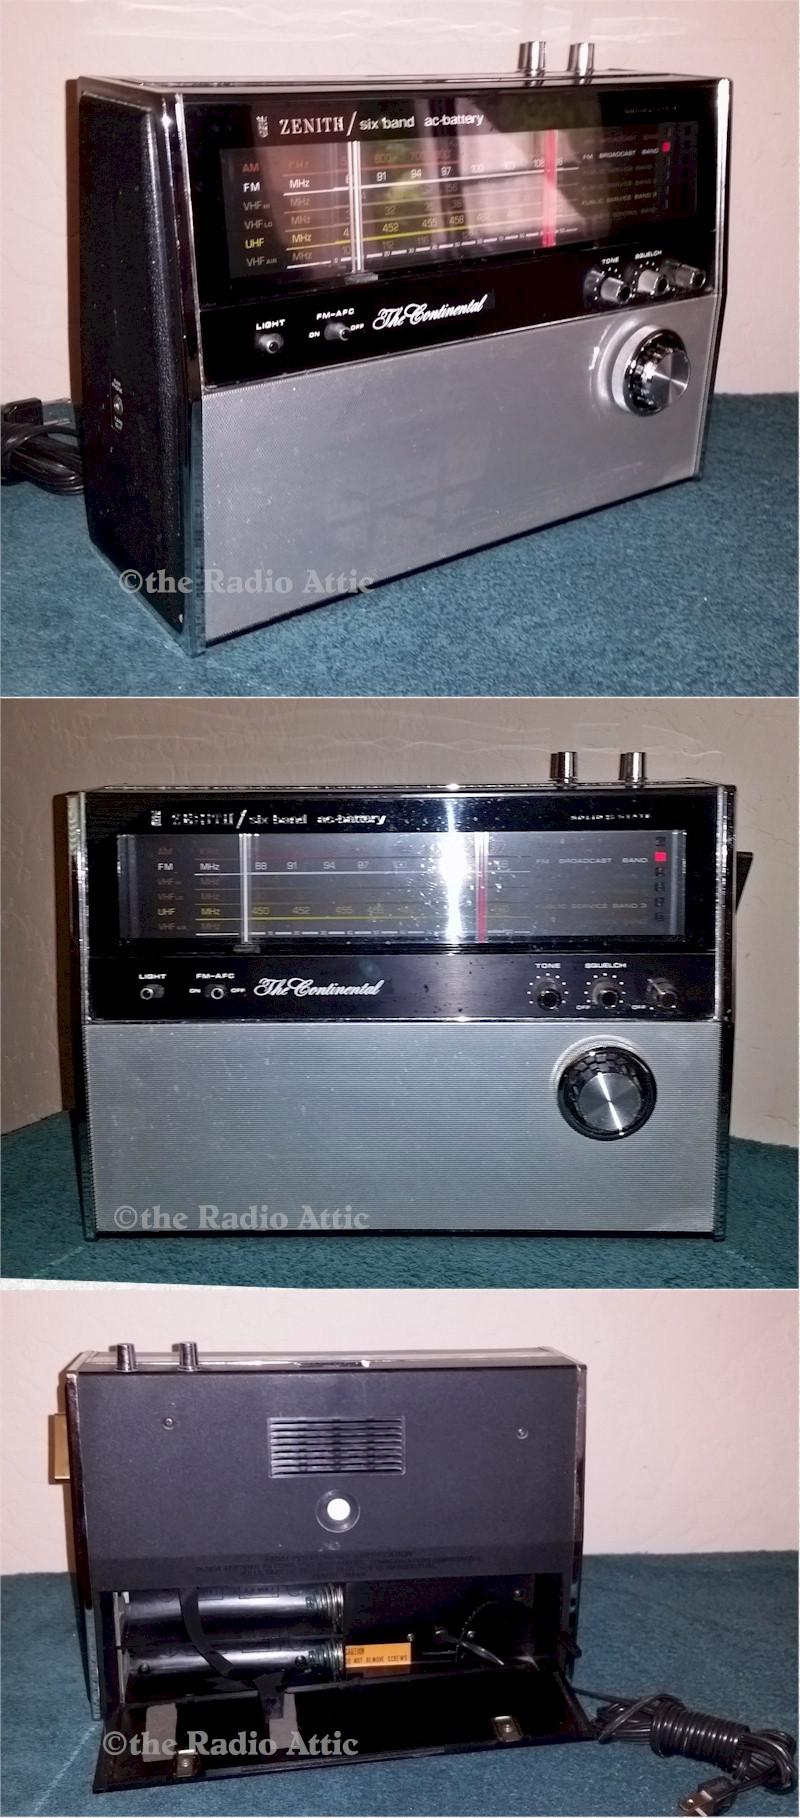 Zenith RE94Y "The Continental" Portable